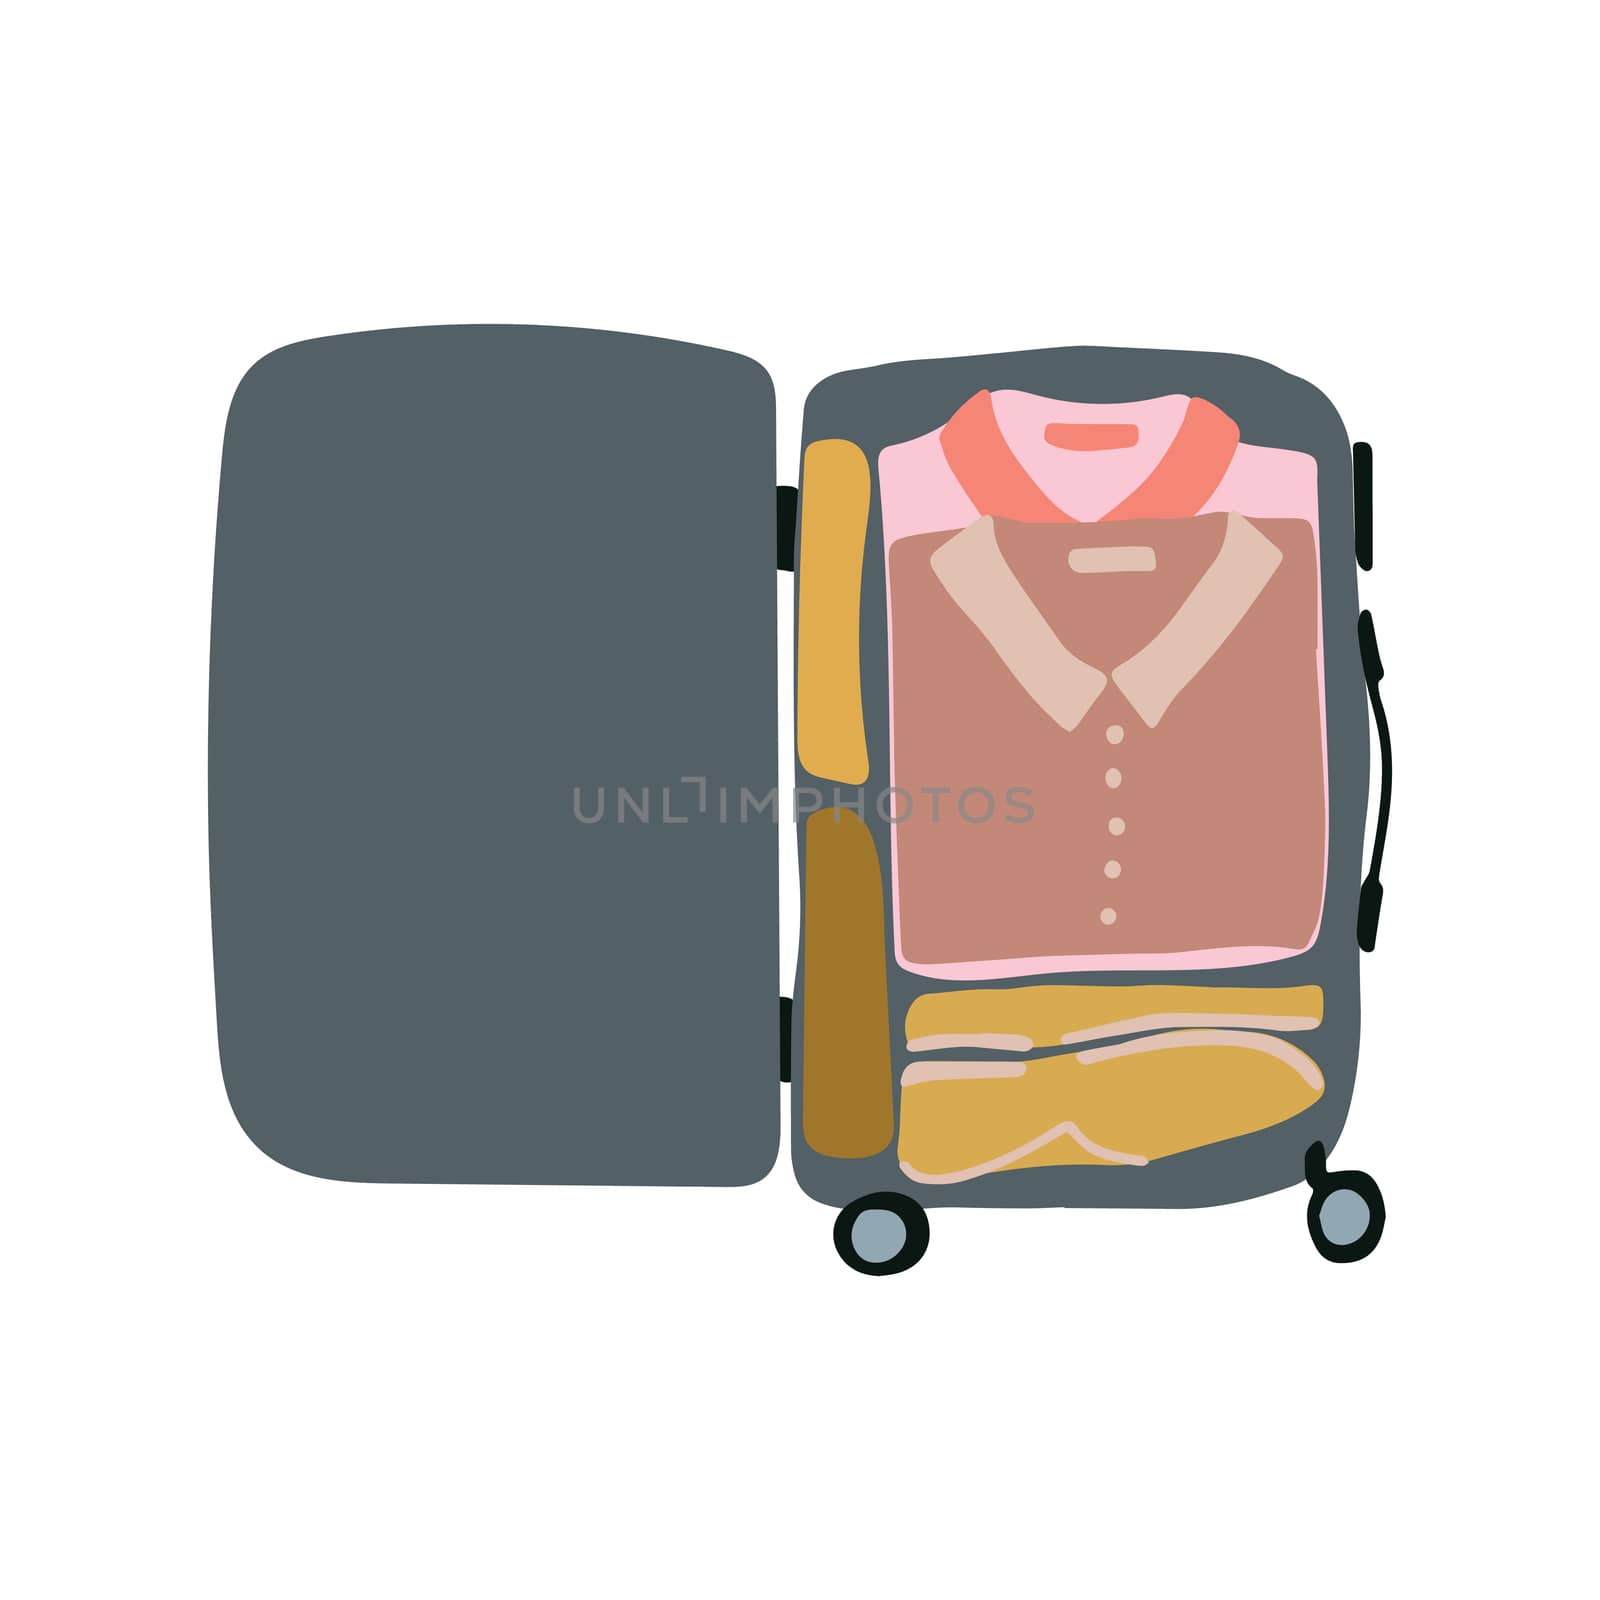 illustration top view luggage. Small open packed suitcase. Advertising, poster, banner and web design.